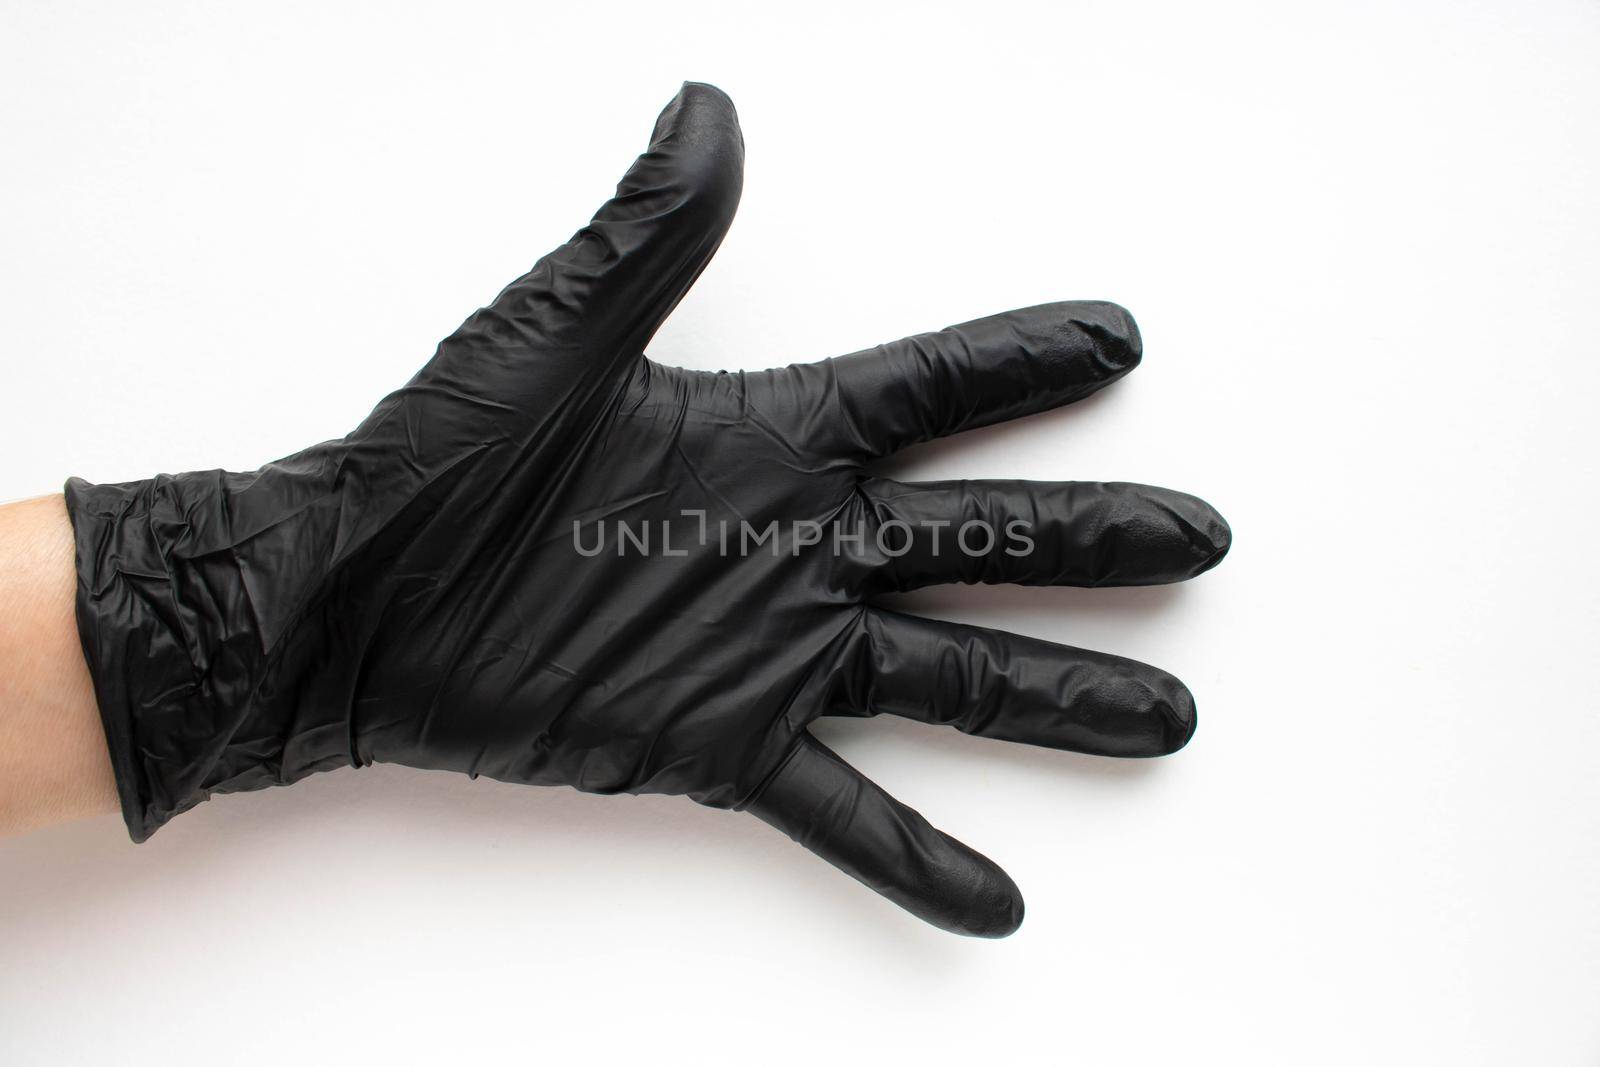 Hand in a black surgical medical glove, isolated on a white background. Production of rubber protective gloves.Hygiene and sanitary standards.